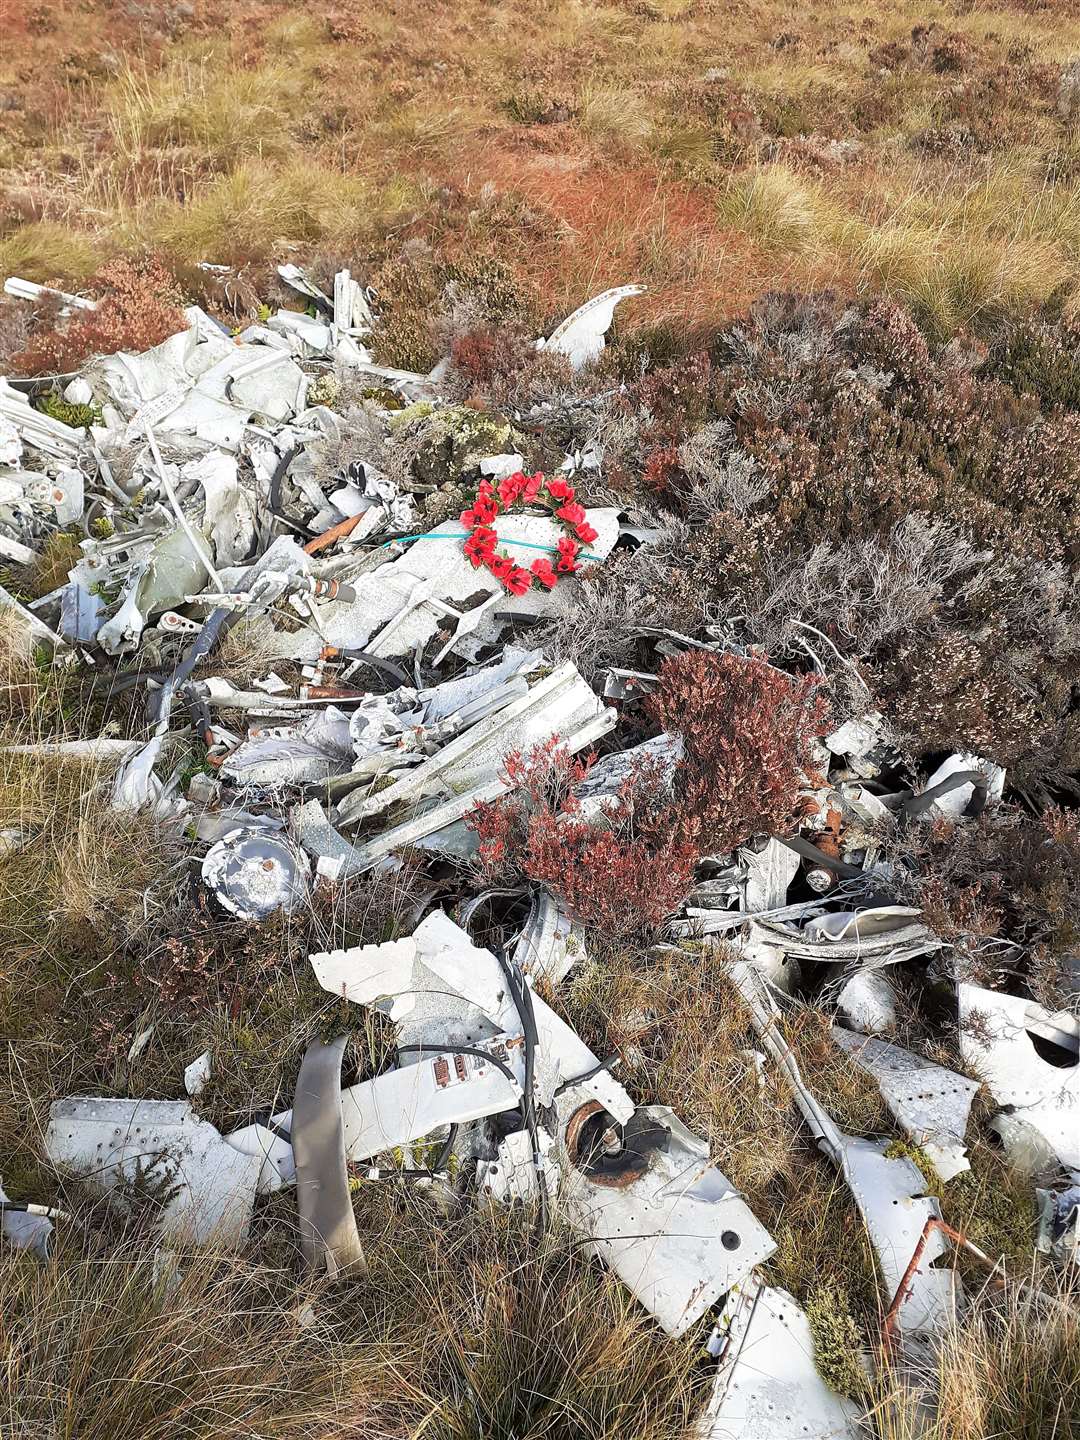 James laid a poppy wreath in memory of the Canberra crew who died when their jet crashed into Scaraben in 1966. Wreckage is still visible. Pictures: James More